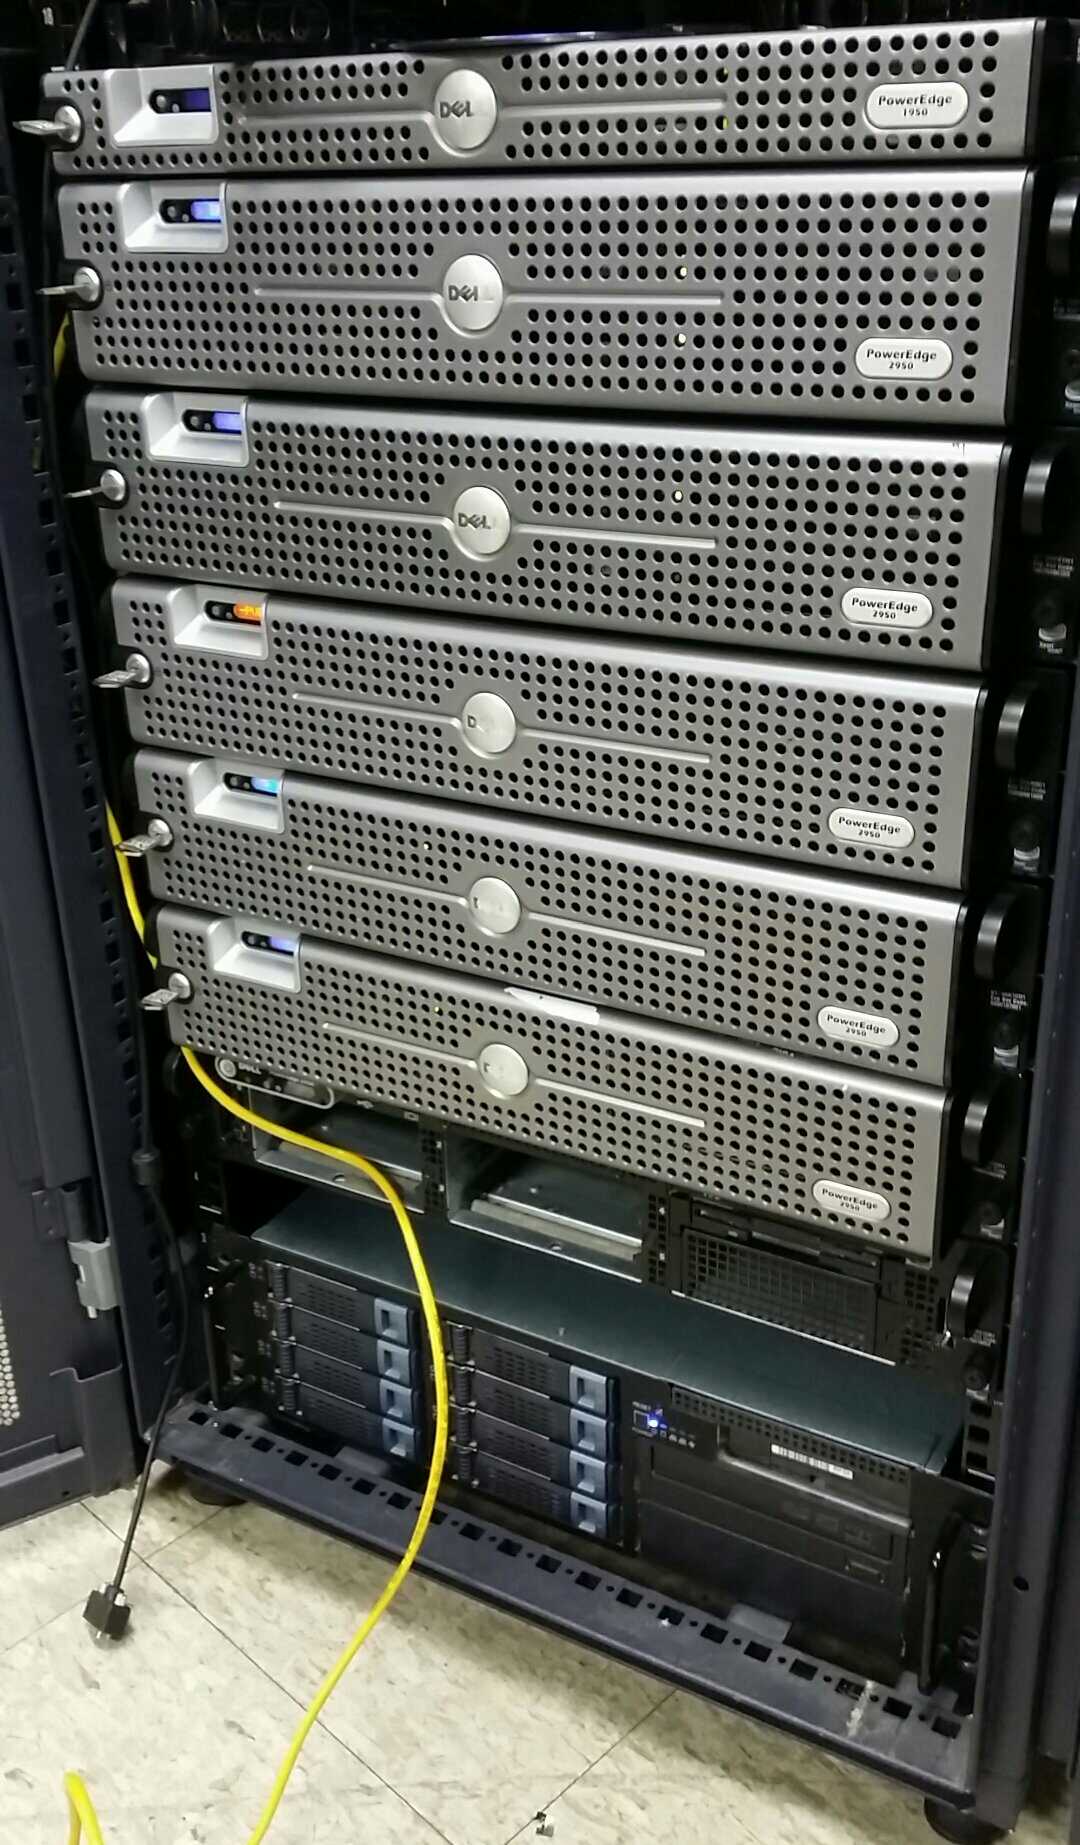 Old reliable Dell stack